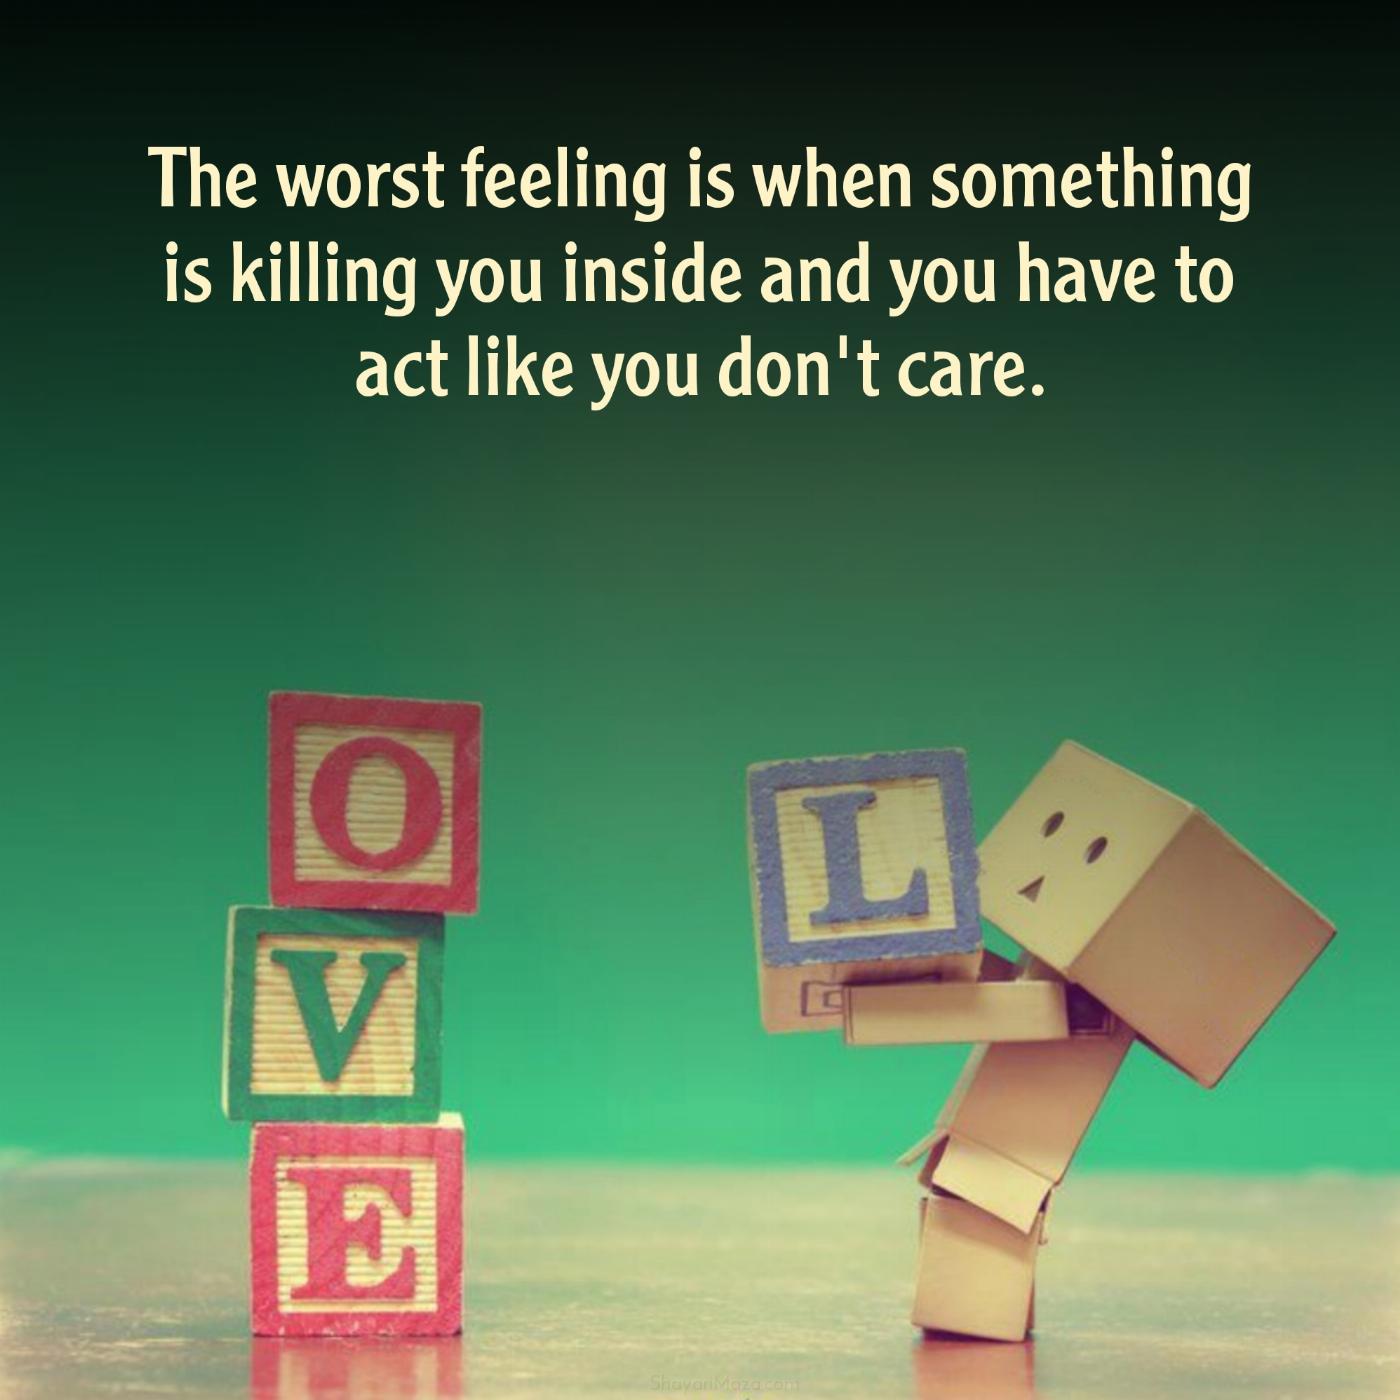 The worst feeling is when something is killing you inside